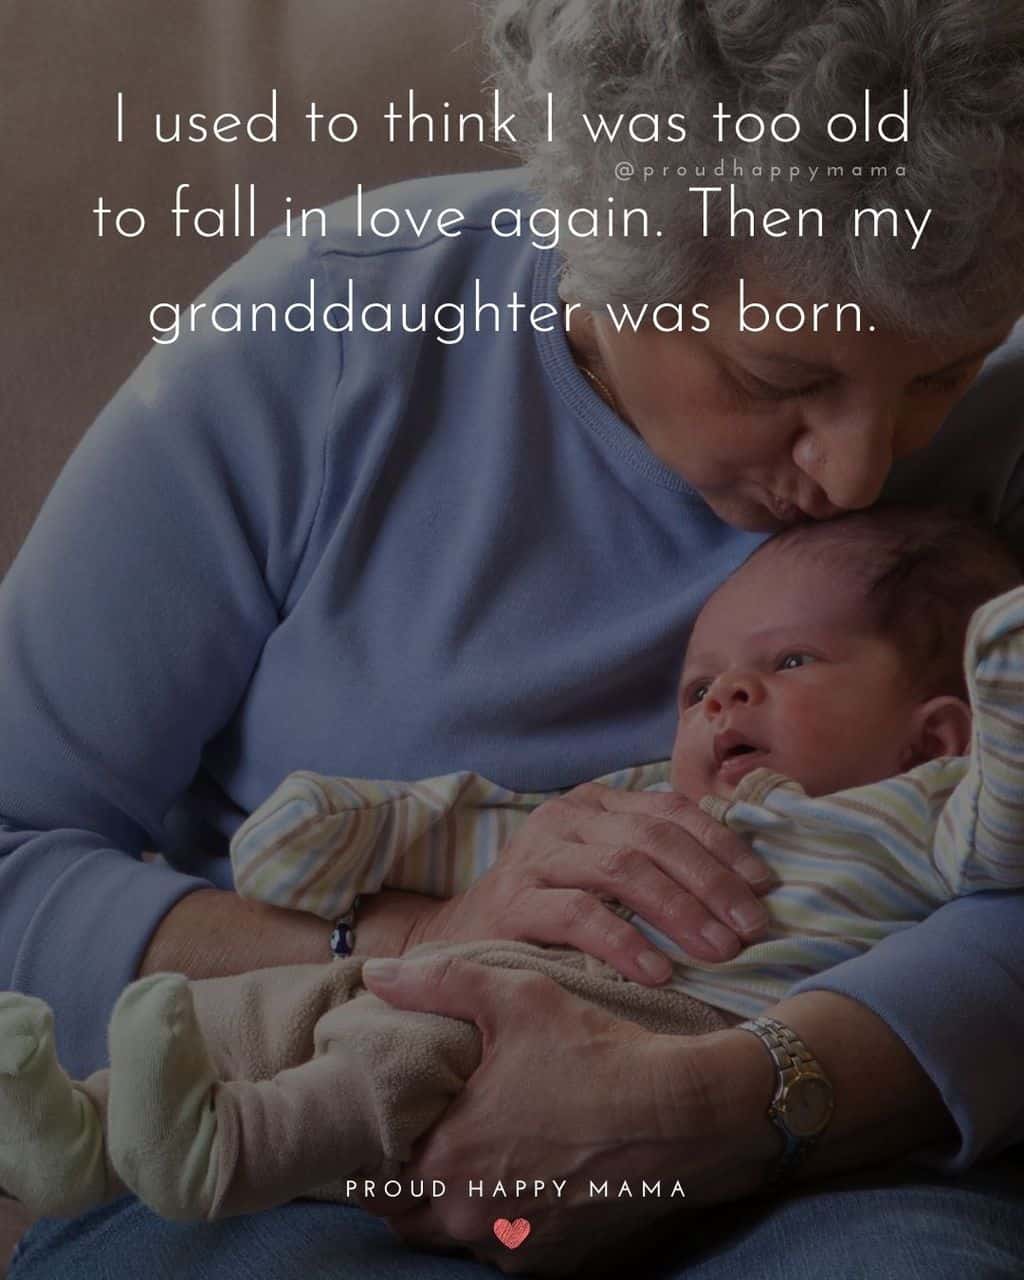 Granddaughter Quotes - I used to think I was too old to fall in love again. Then my granddaughter was born.’